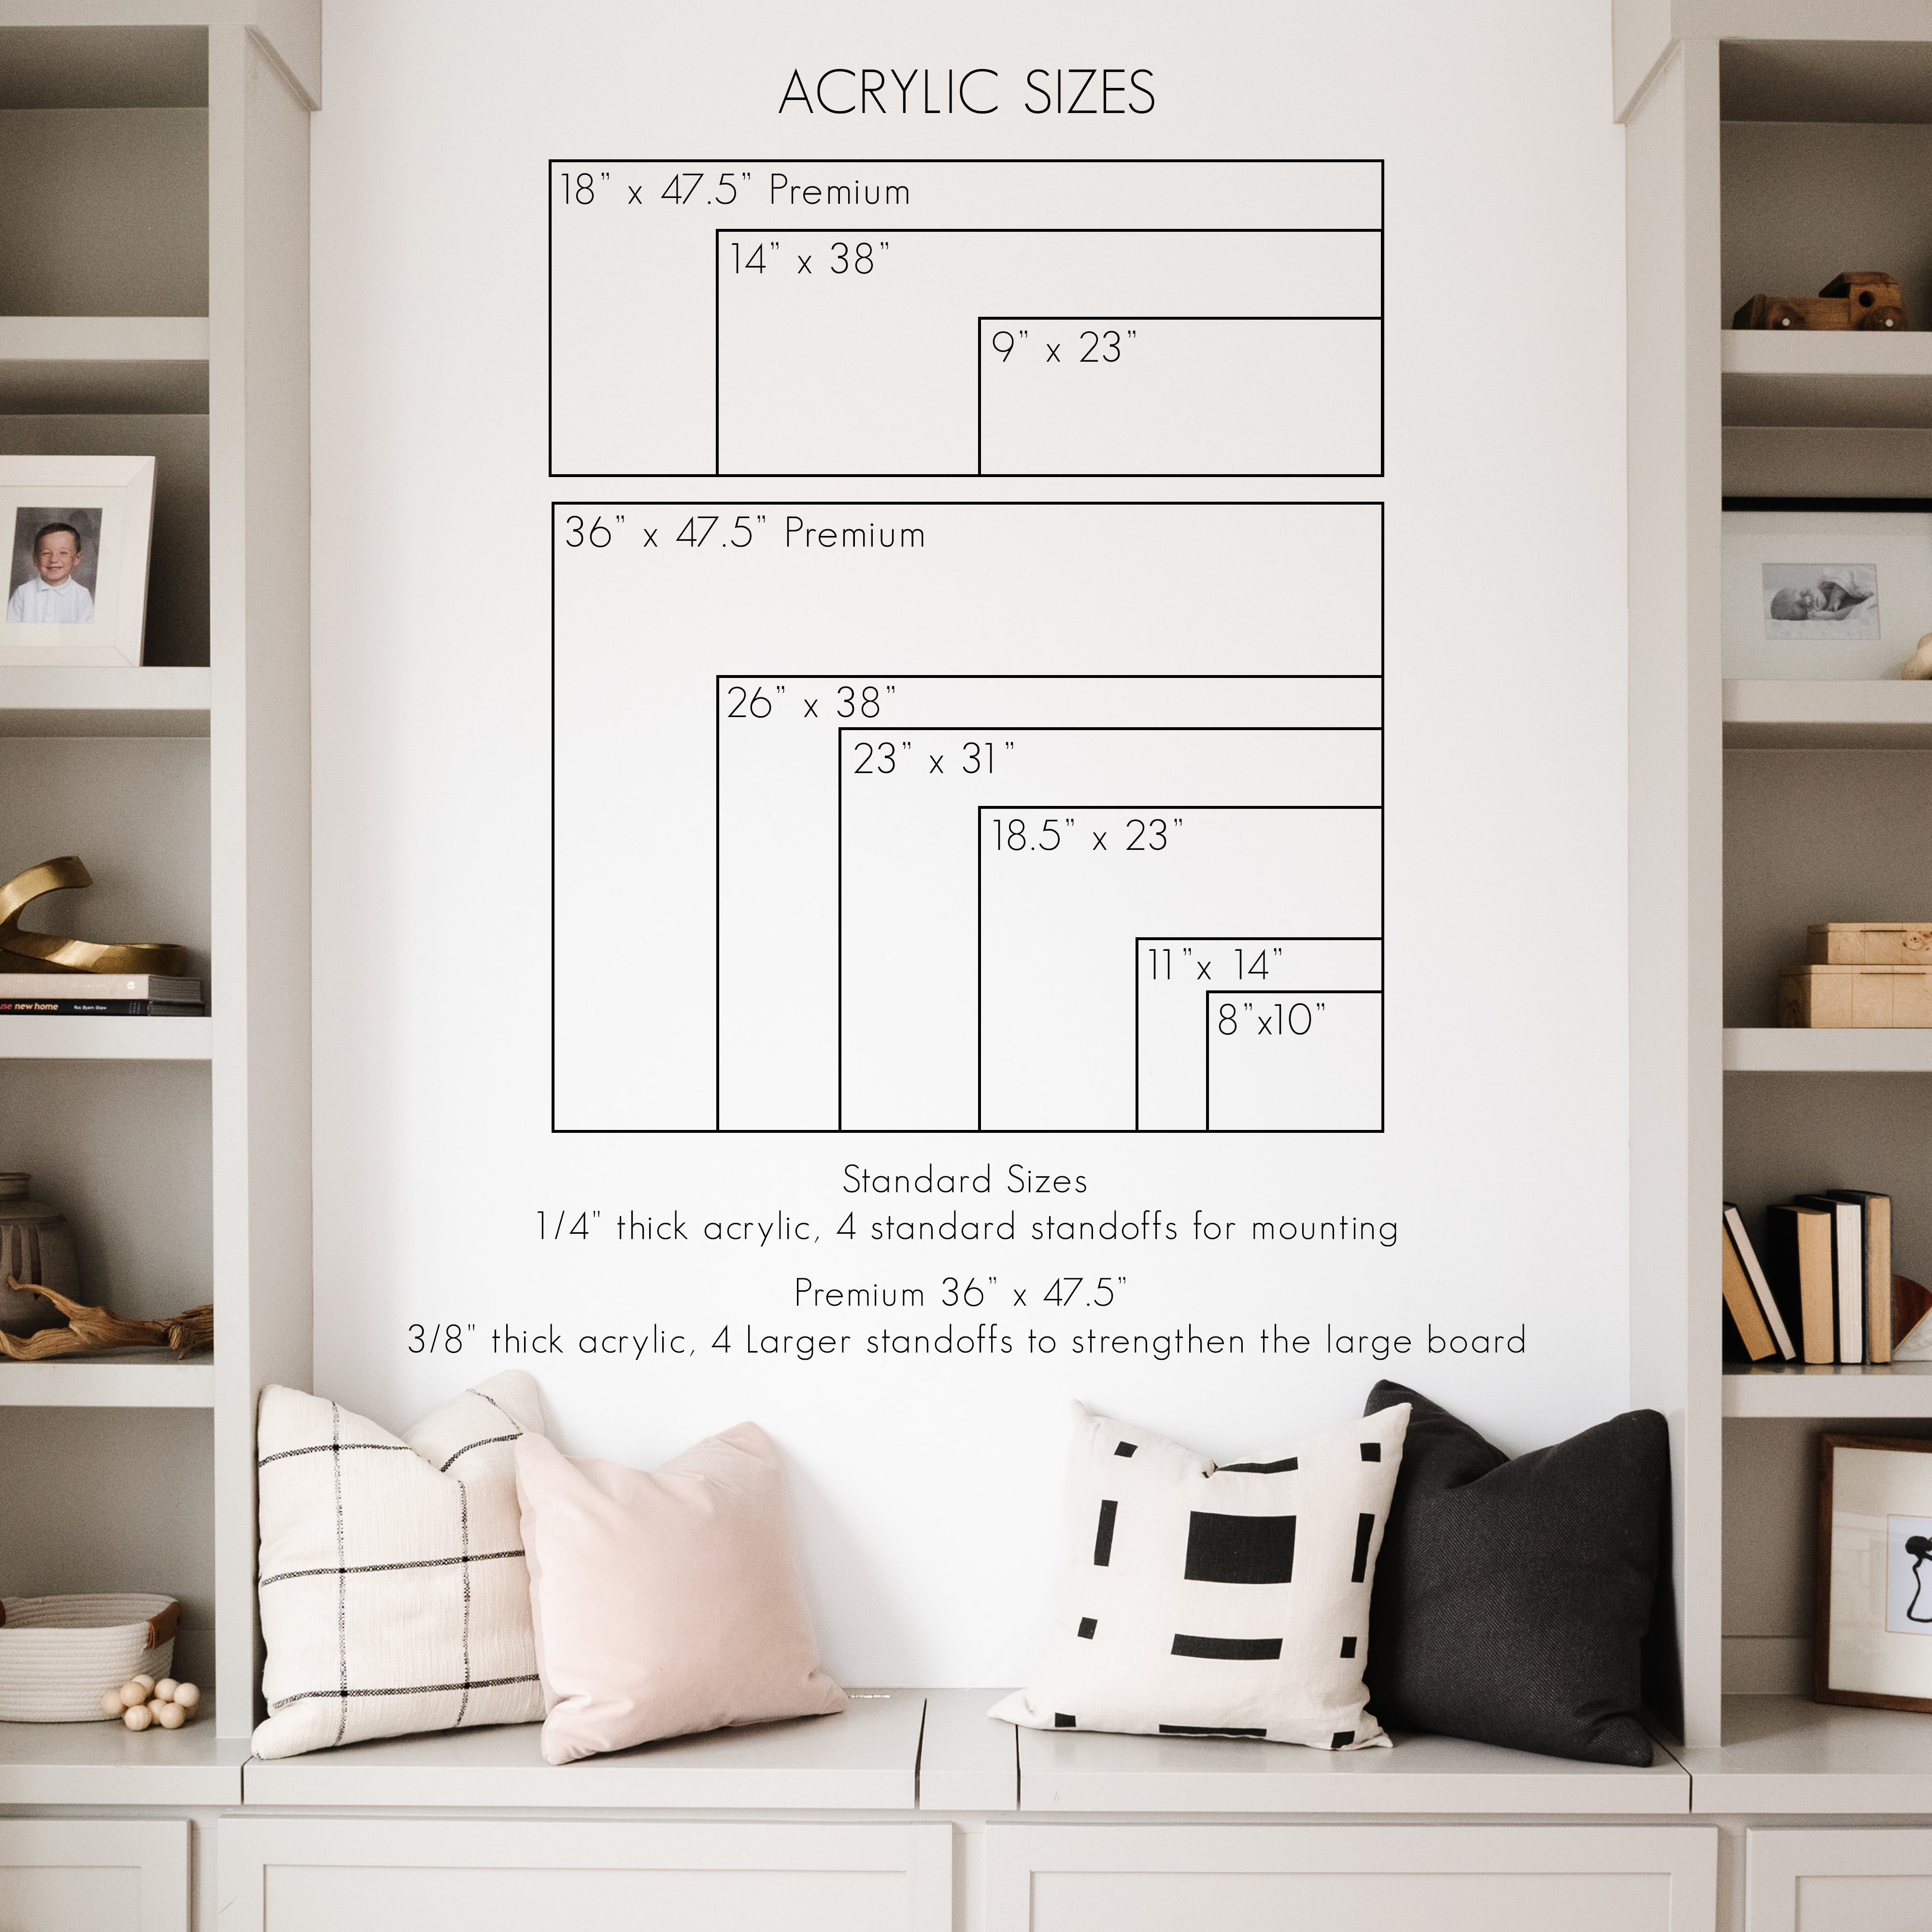 2 Month Frosted Acrylic Calendar | Horizontal Craig